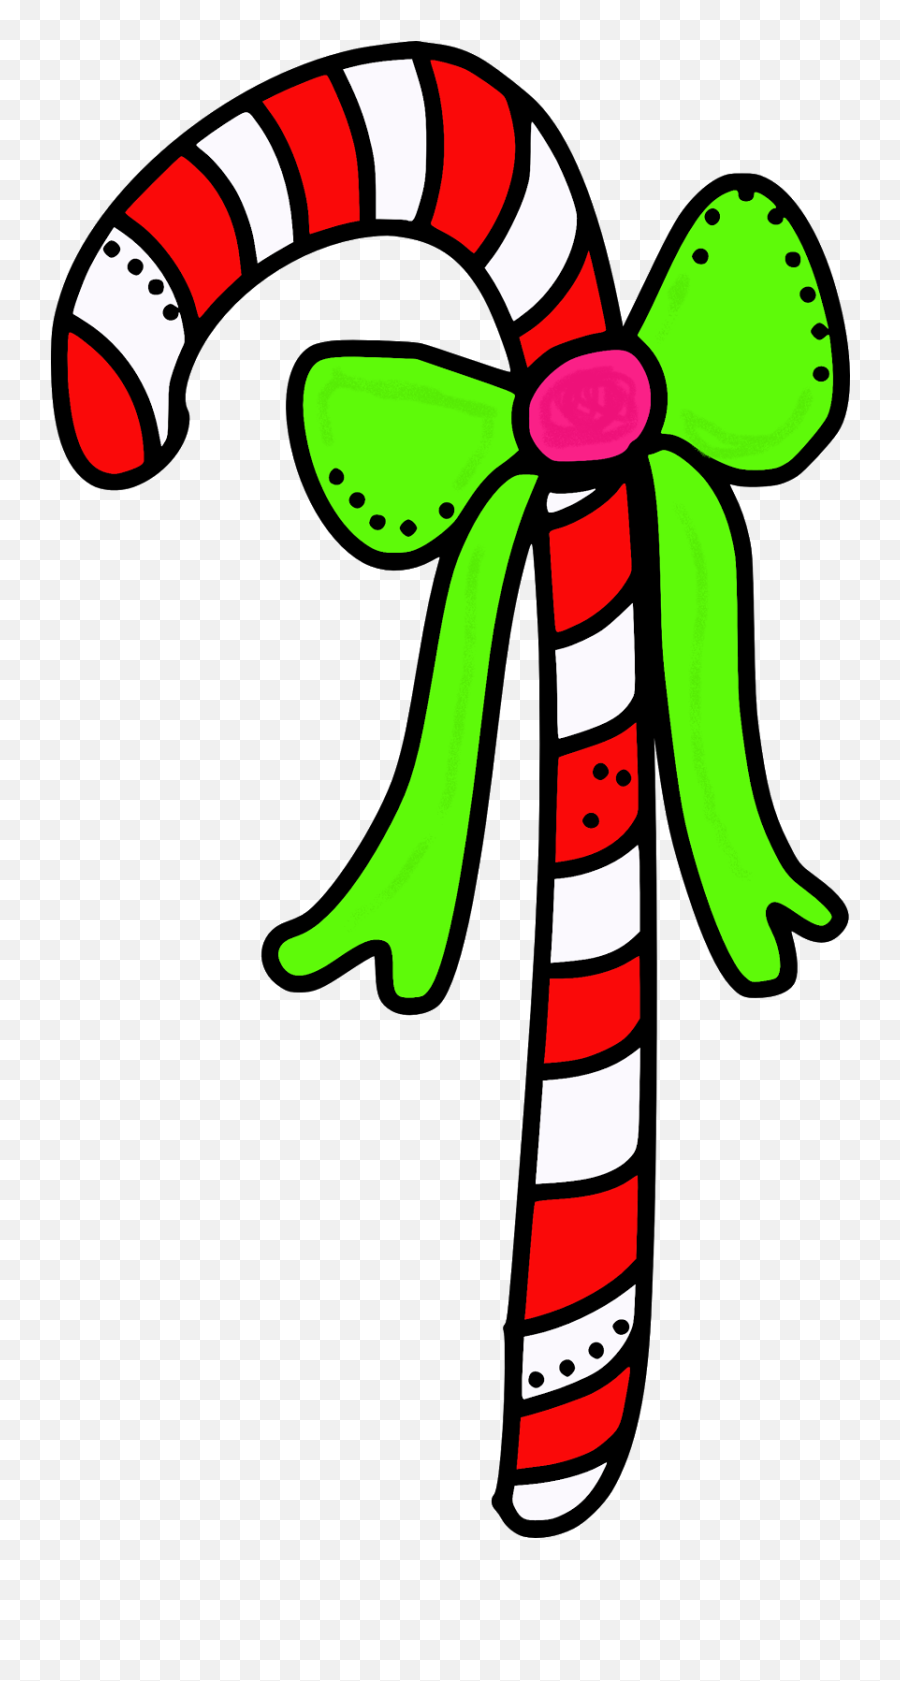 Transparent Background Grinch Png - Grinch Stole Christmas Clip Art,Grinch Png